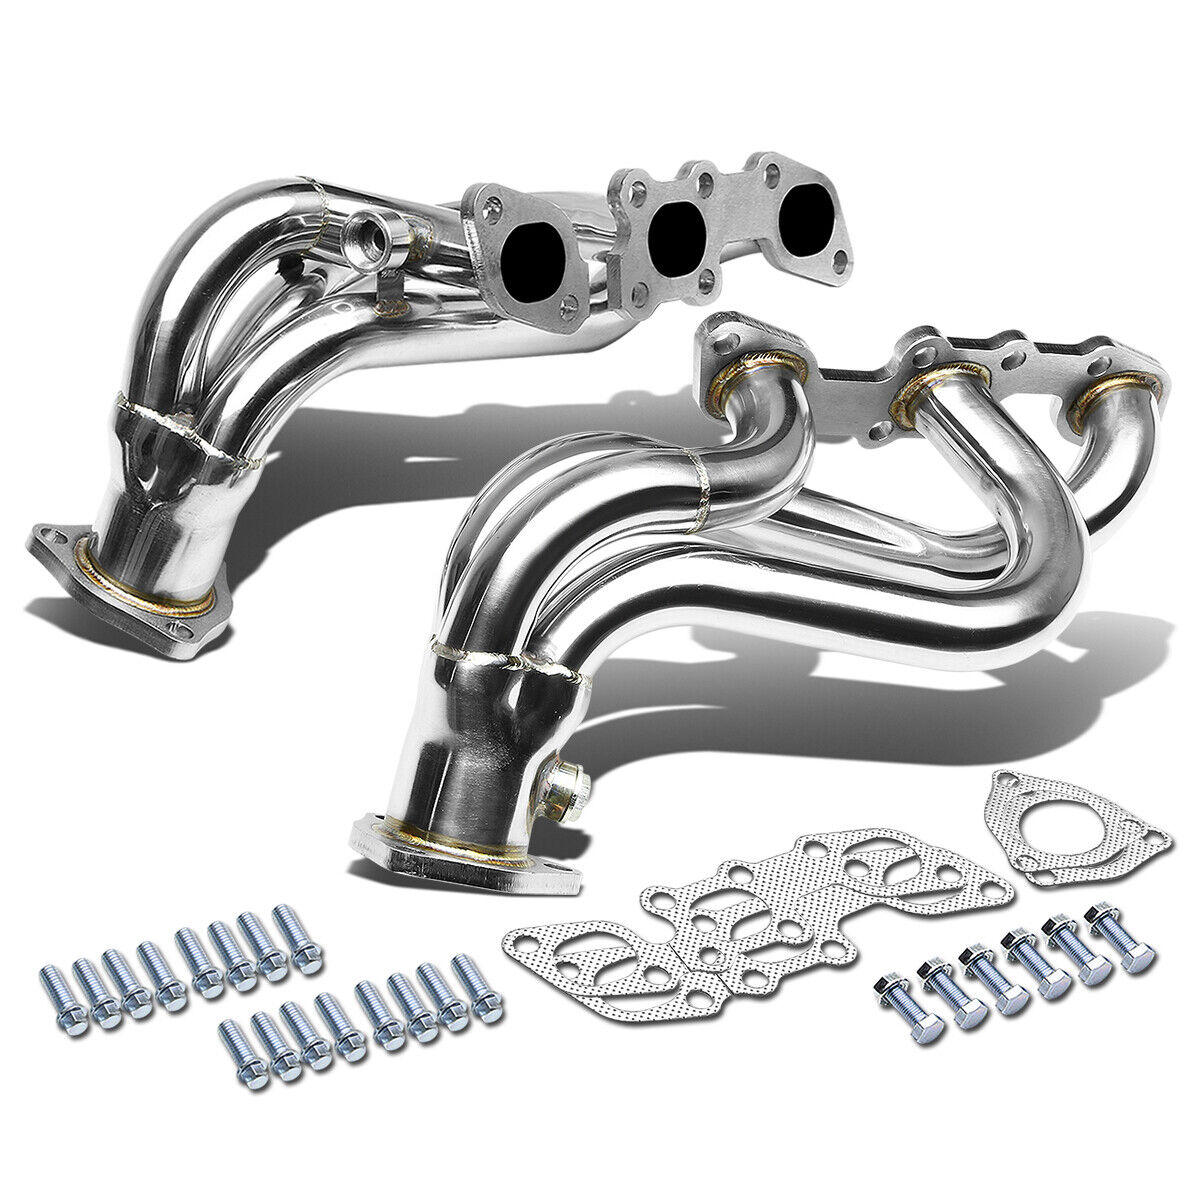 Fit 90-96 Nissan 300Zx Z32 V6 Non-Turbo Stainless Racing Manifold Header/Exhaust